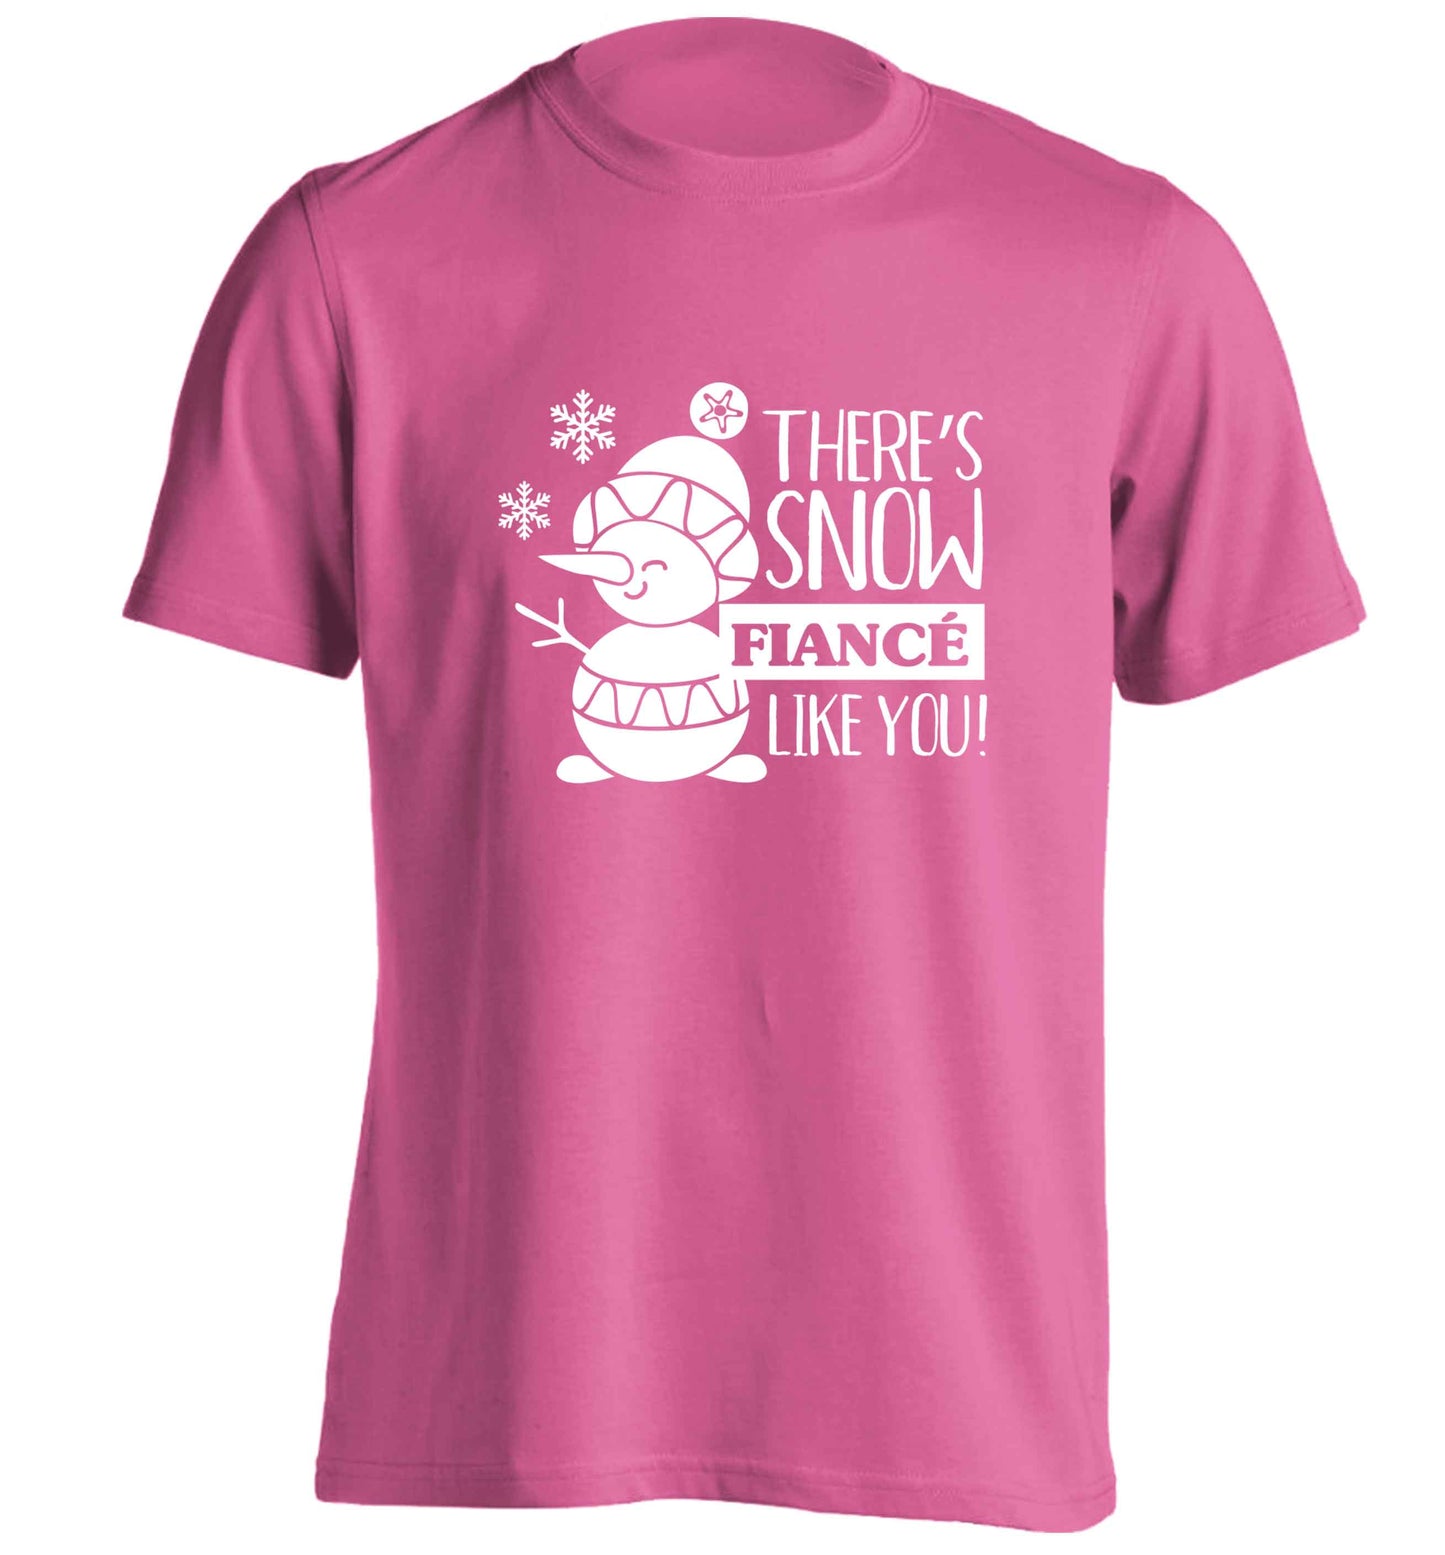 There's snow fiance like you adults unisex pink Tshirt 2XL